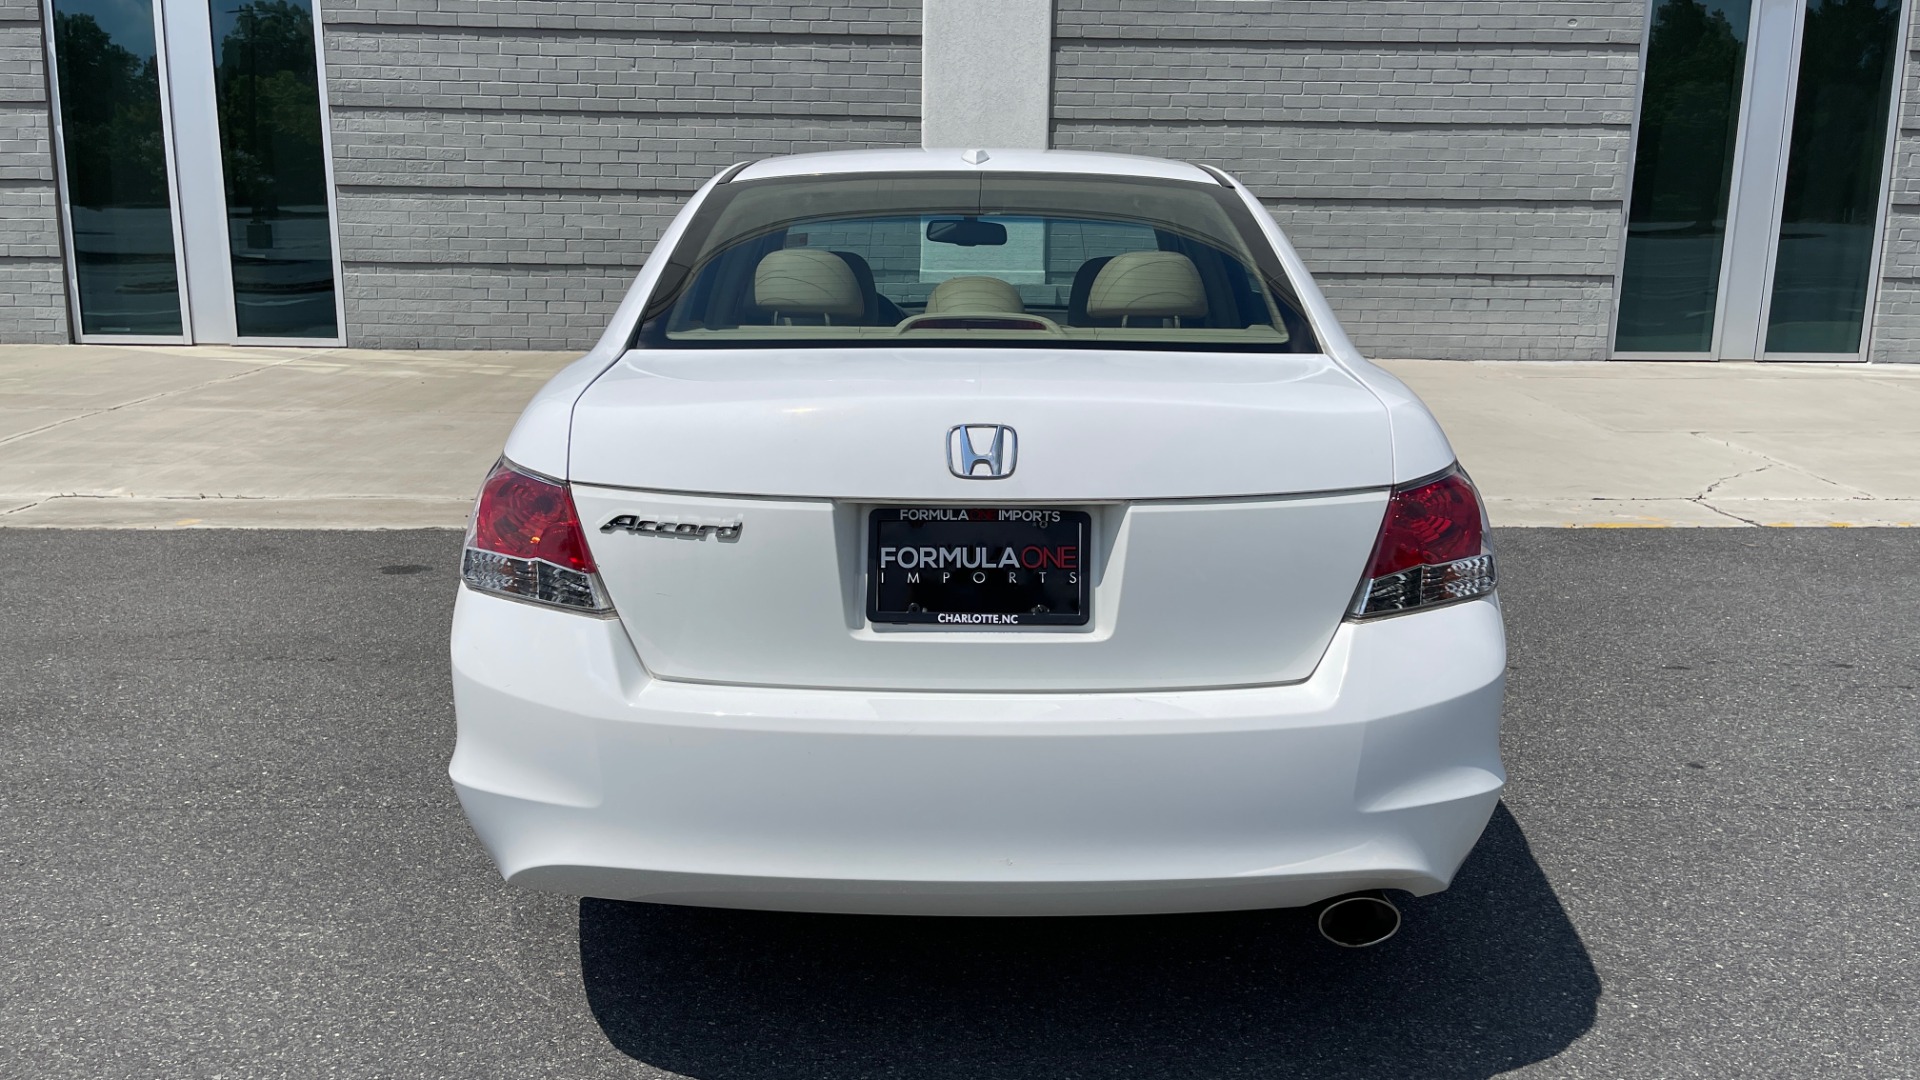 Used 2009 Honda ACCORD EX-L 4DR / 2.4L / AUTO / SUNROOF / ANC / DUAL-ZONE AUTO A/C for sale Sold at Formula Imports in Charlotte NC 28227 7